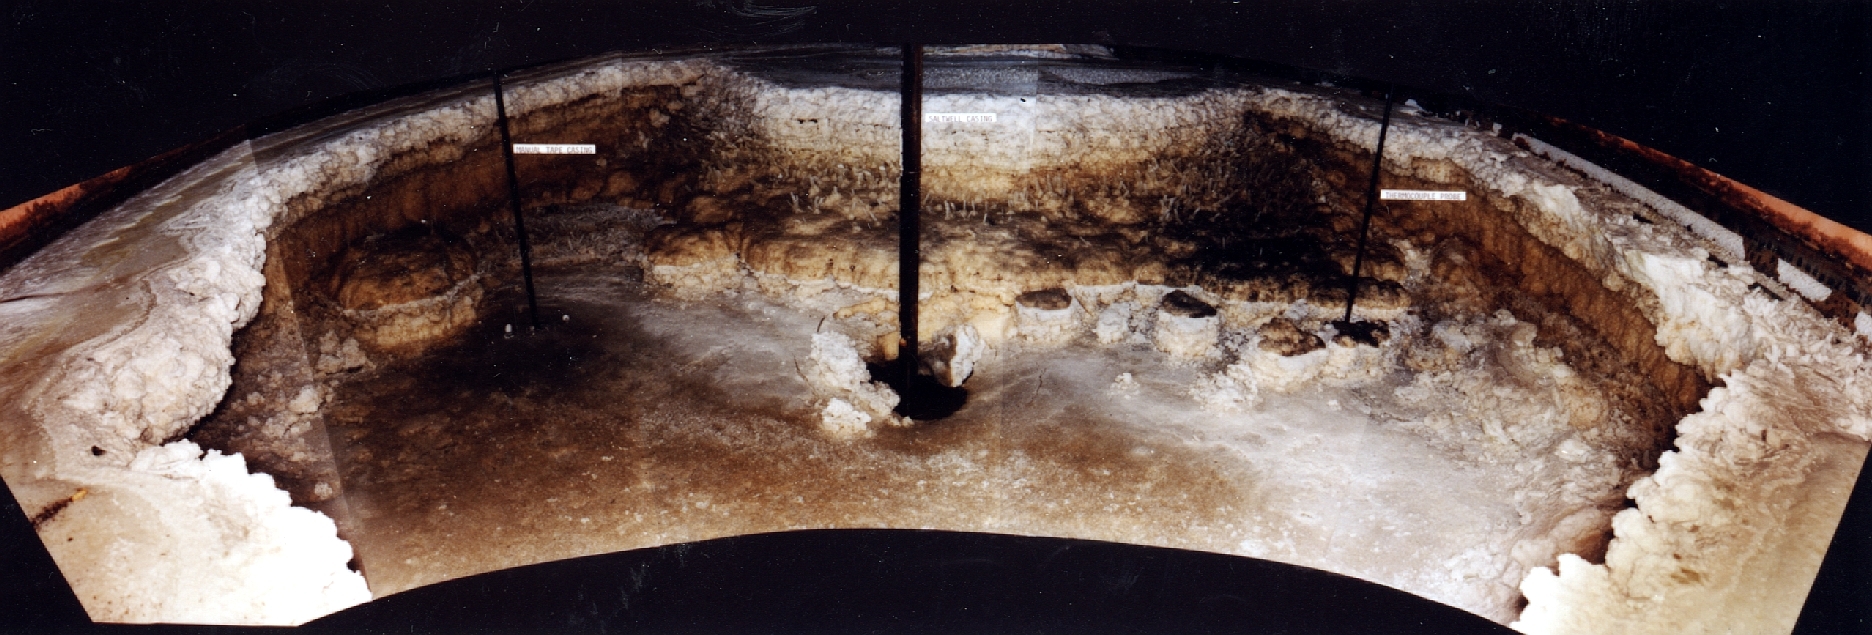 Photo inside an underground storage tank, showing large built up sections of white saltcake around the sides, with the middle full of a dark brown and white specked radioactive sludge.